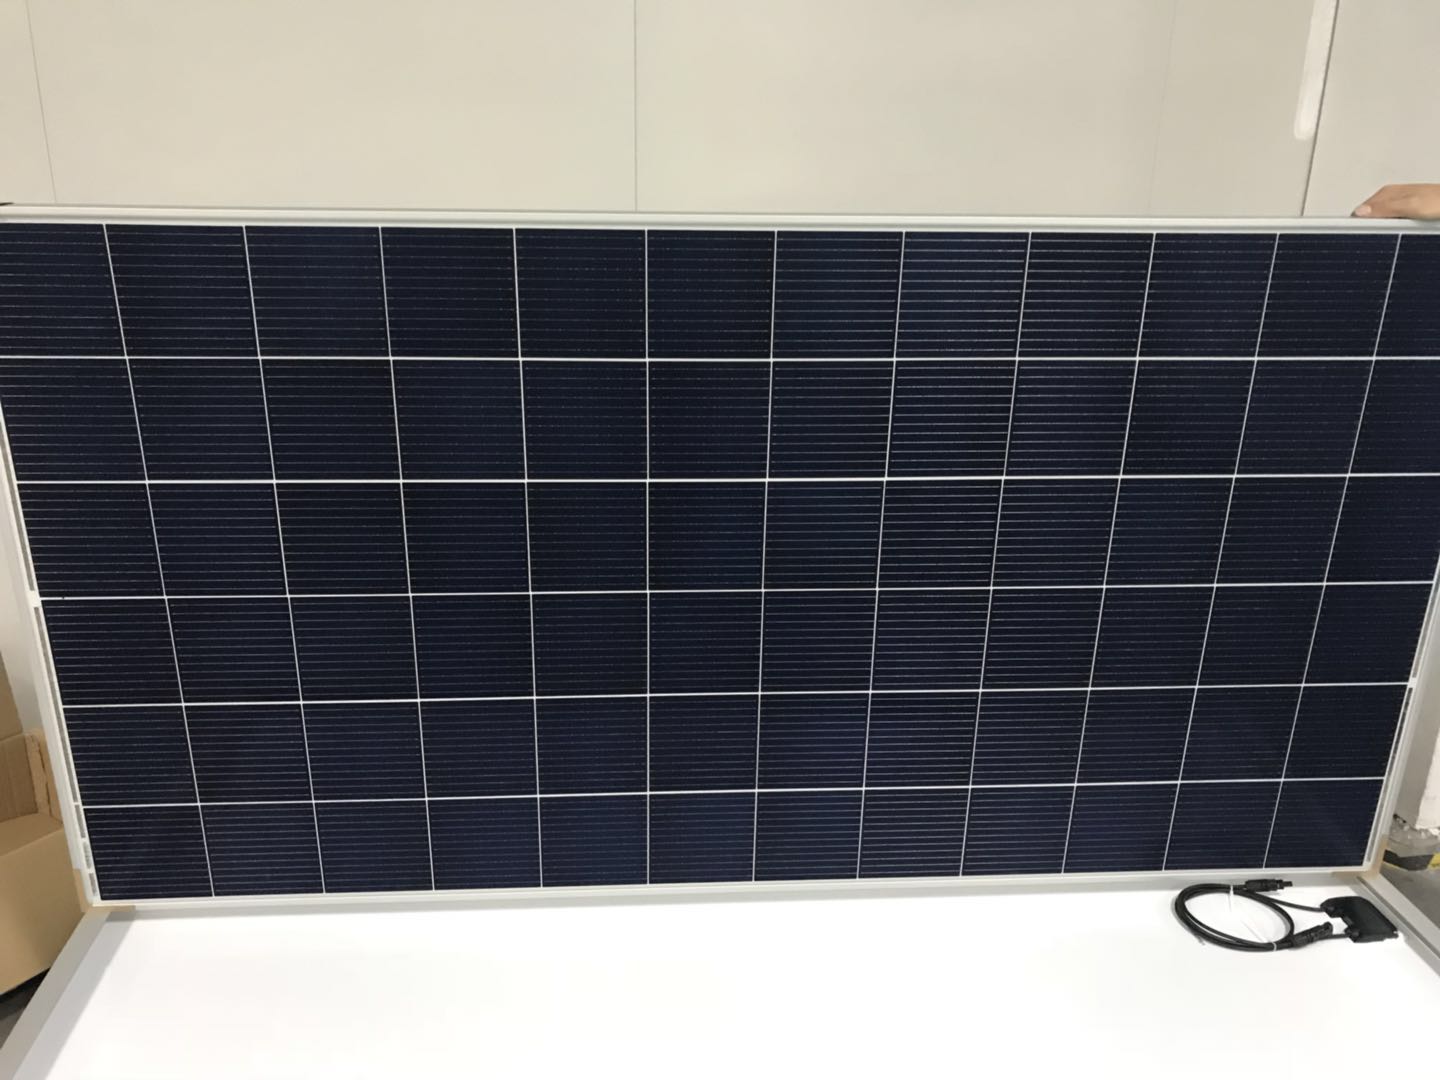 Latest New Model: 12BB 330W POLY Solar Panel Completed